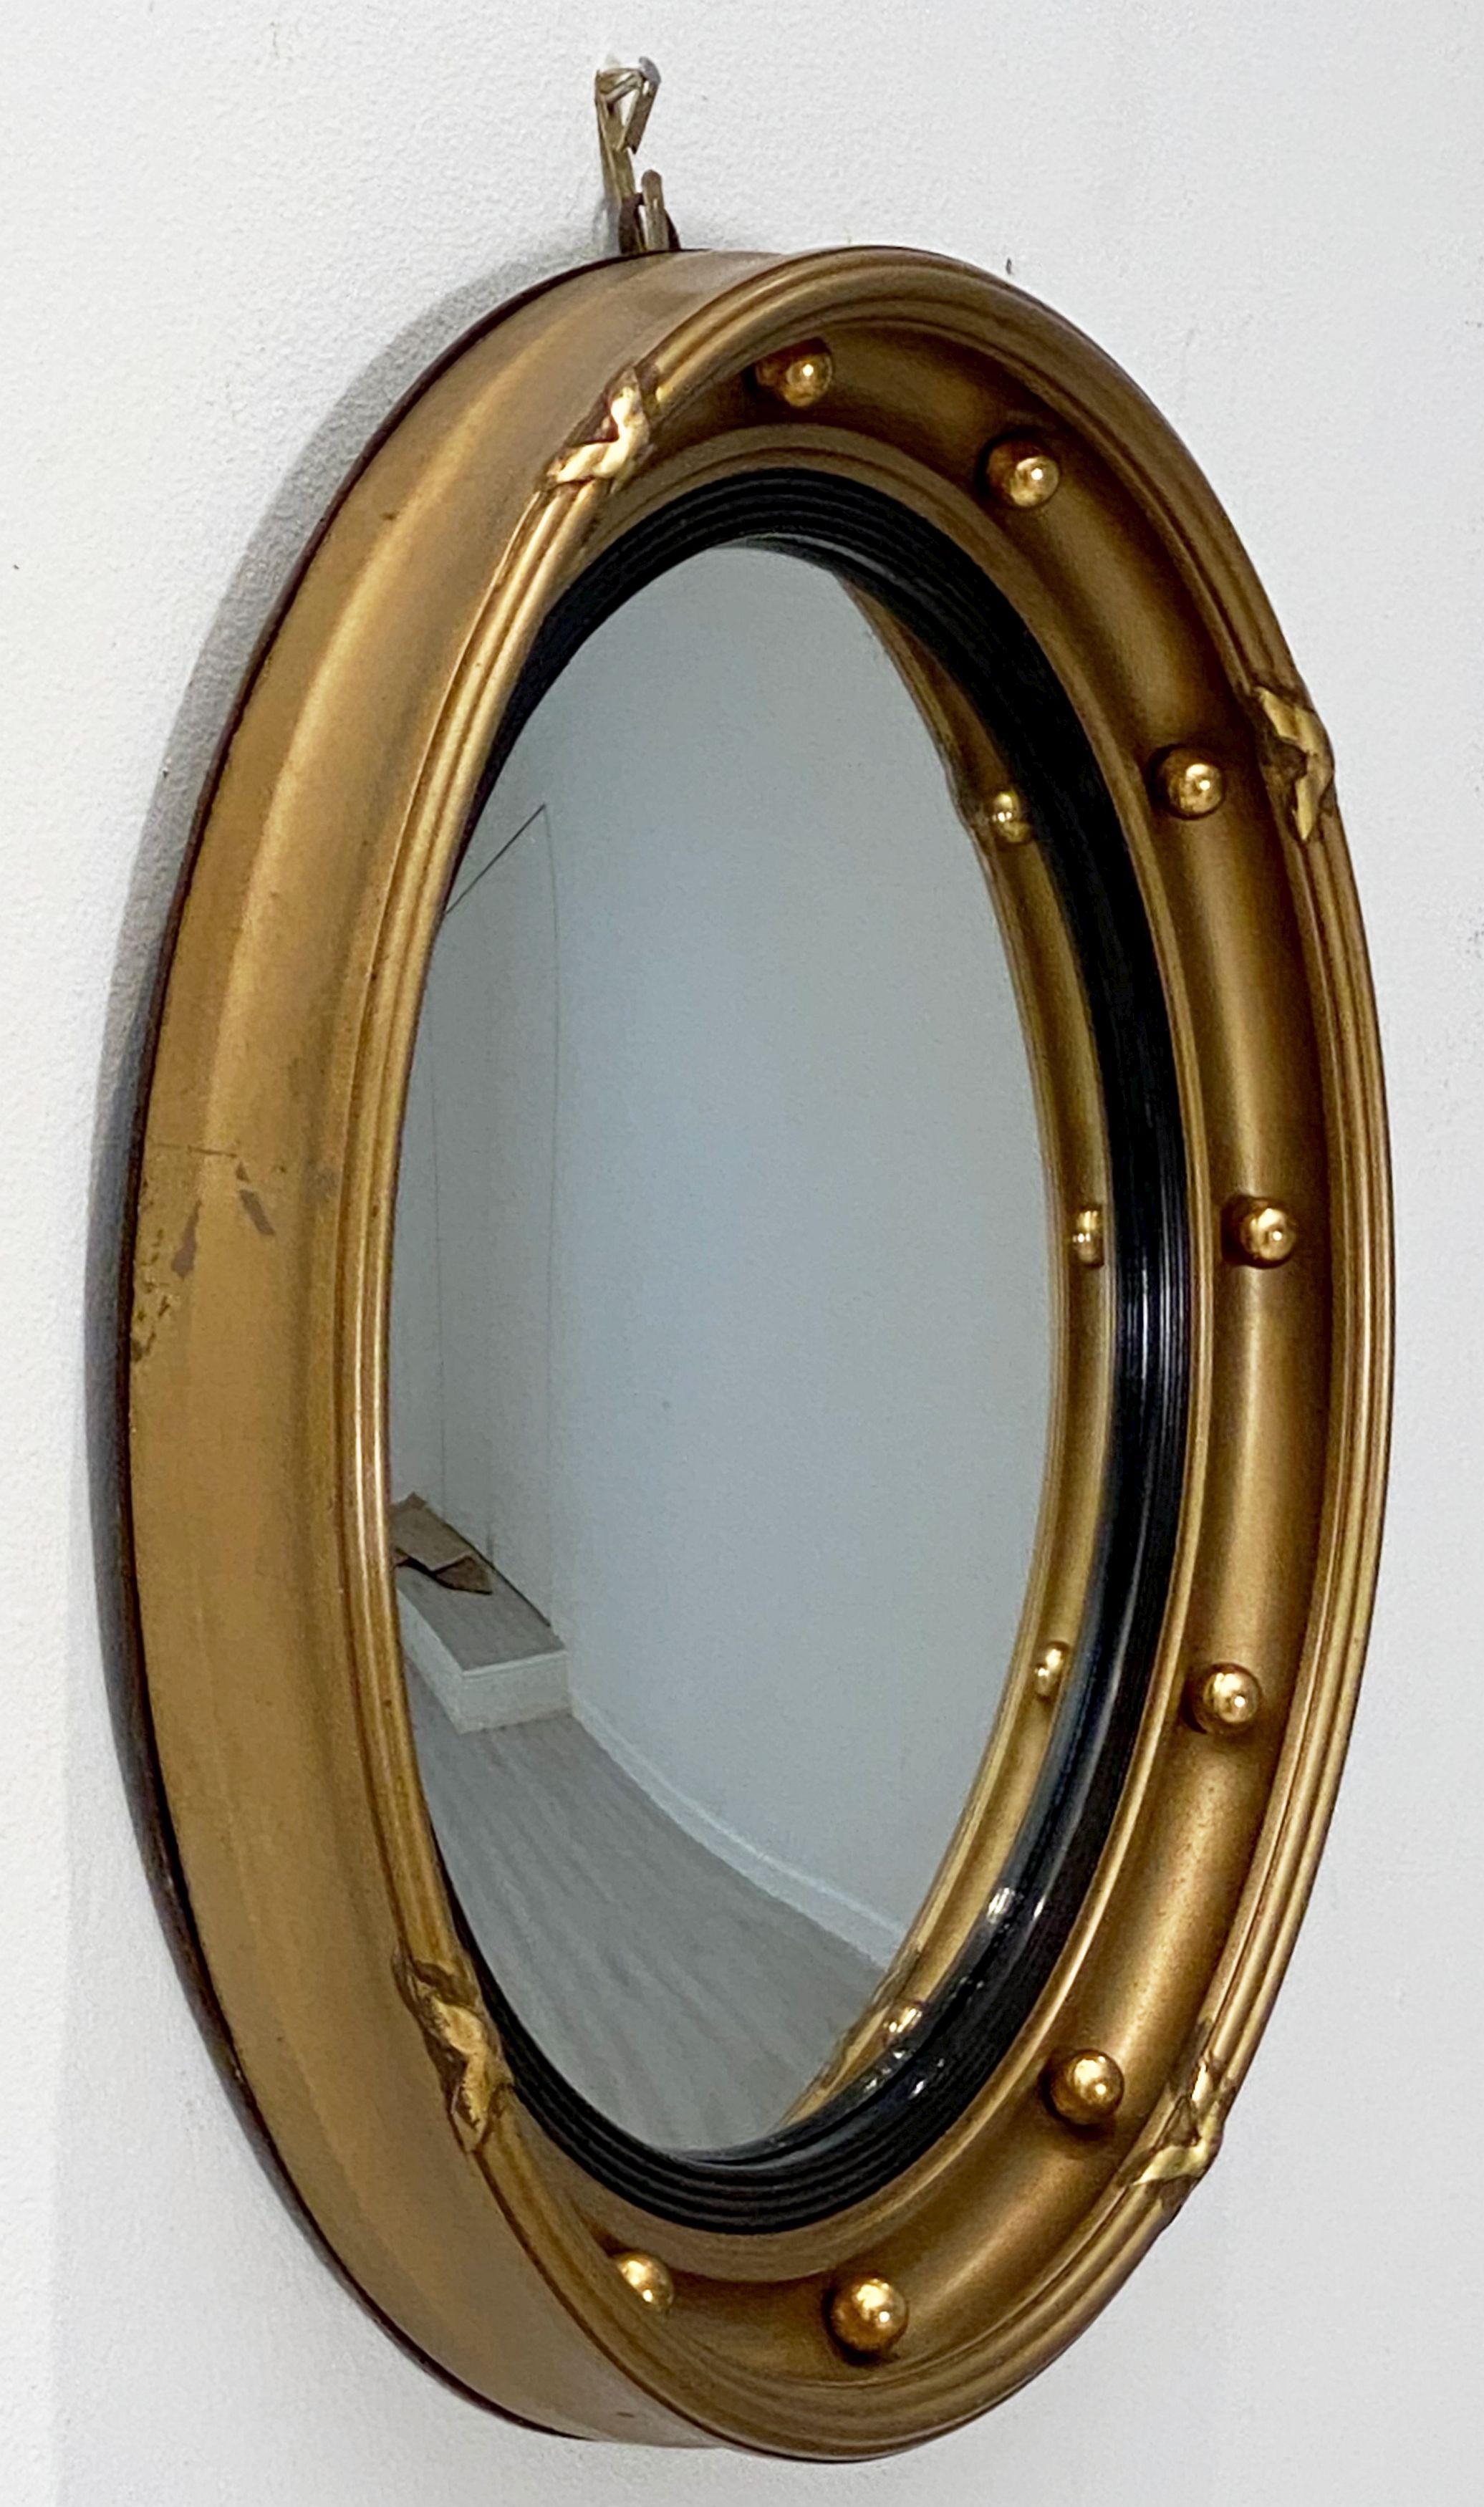 A fine English round or circular convex mirror featuring a Regency design of a moulded gilt frame and ebonized trim, with gilt balls around the circumference.

Dimensions: Diameter 15 3/4 inches x Depth 2 1/8 inches